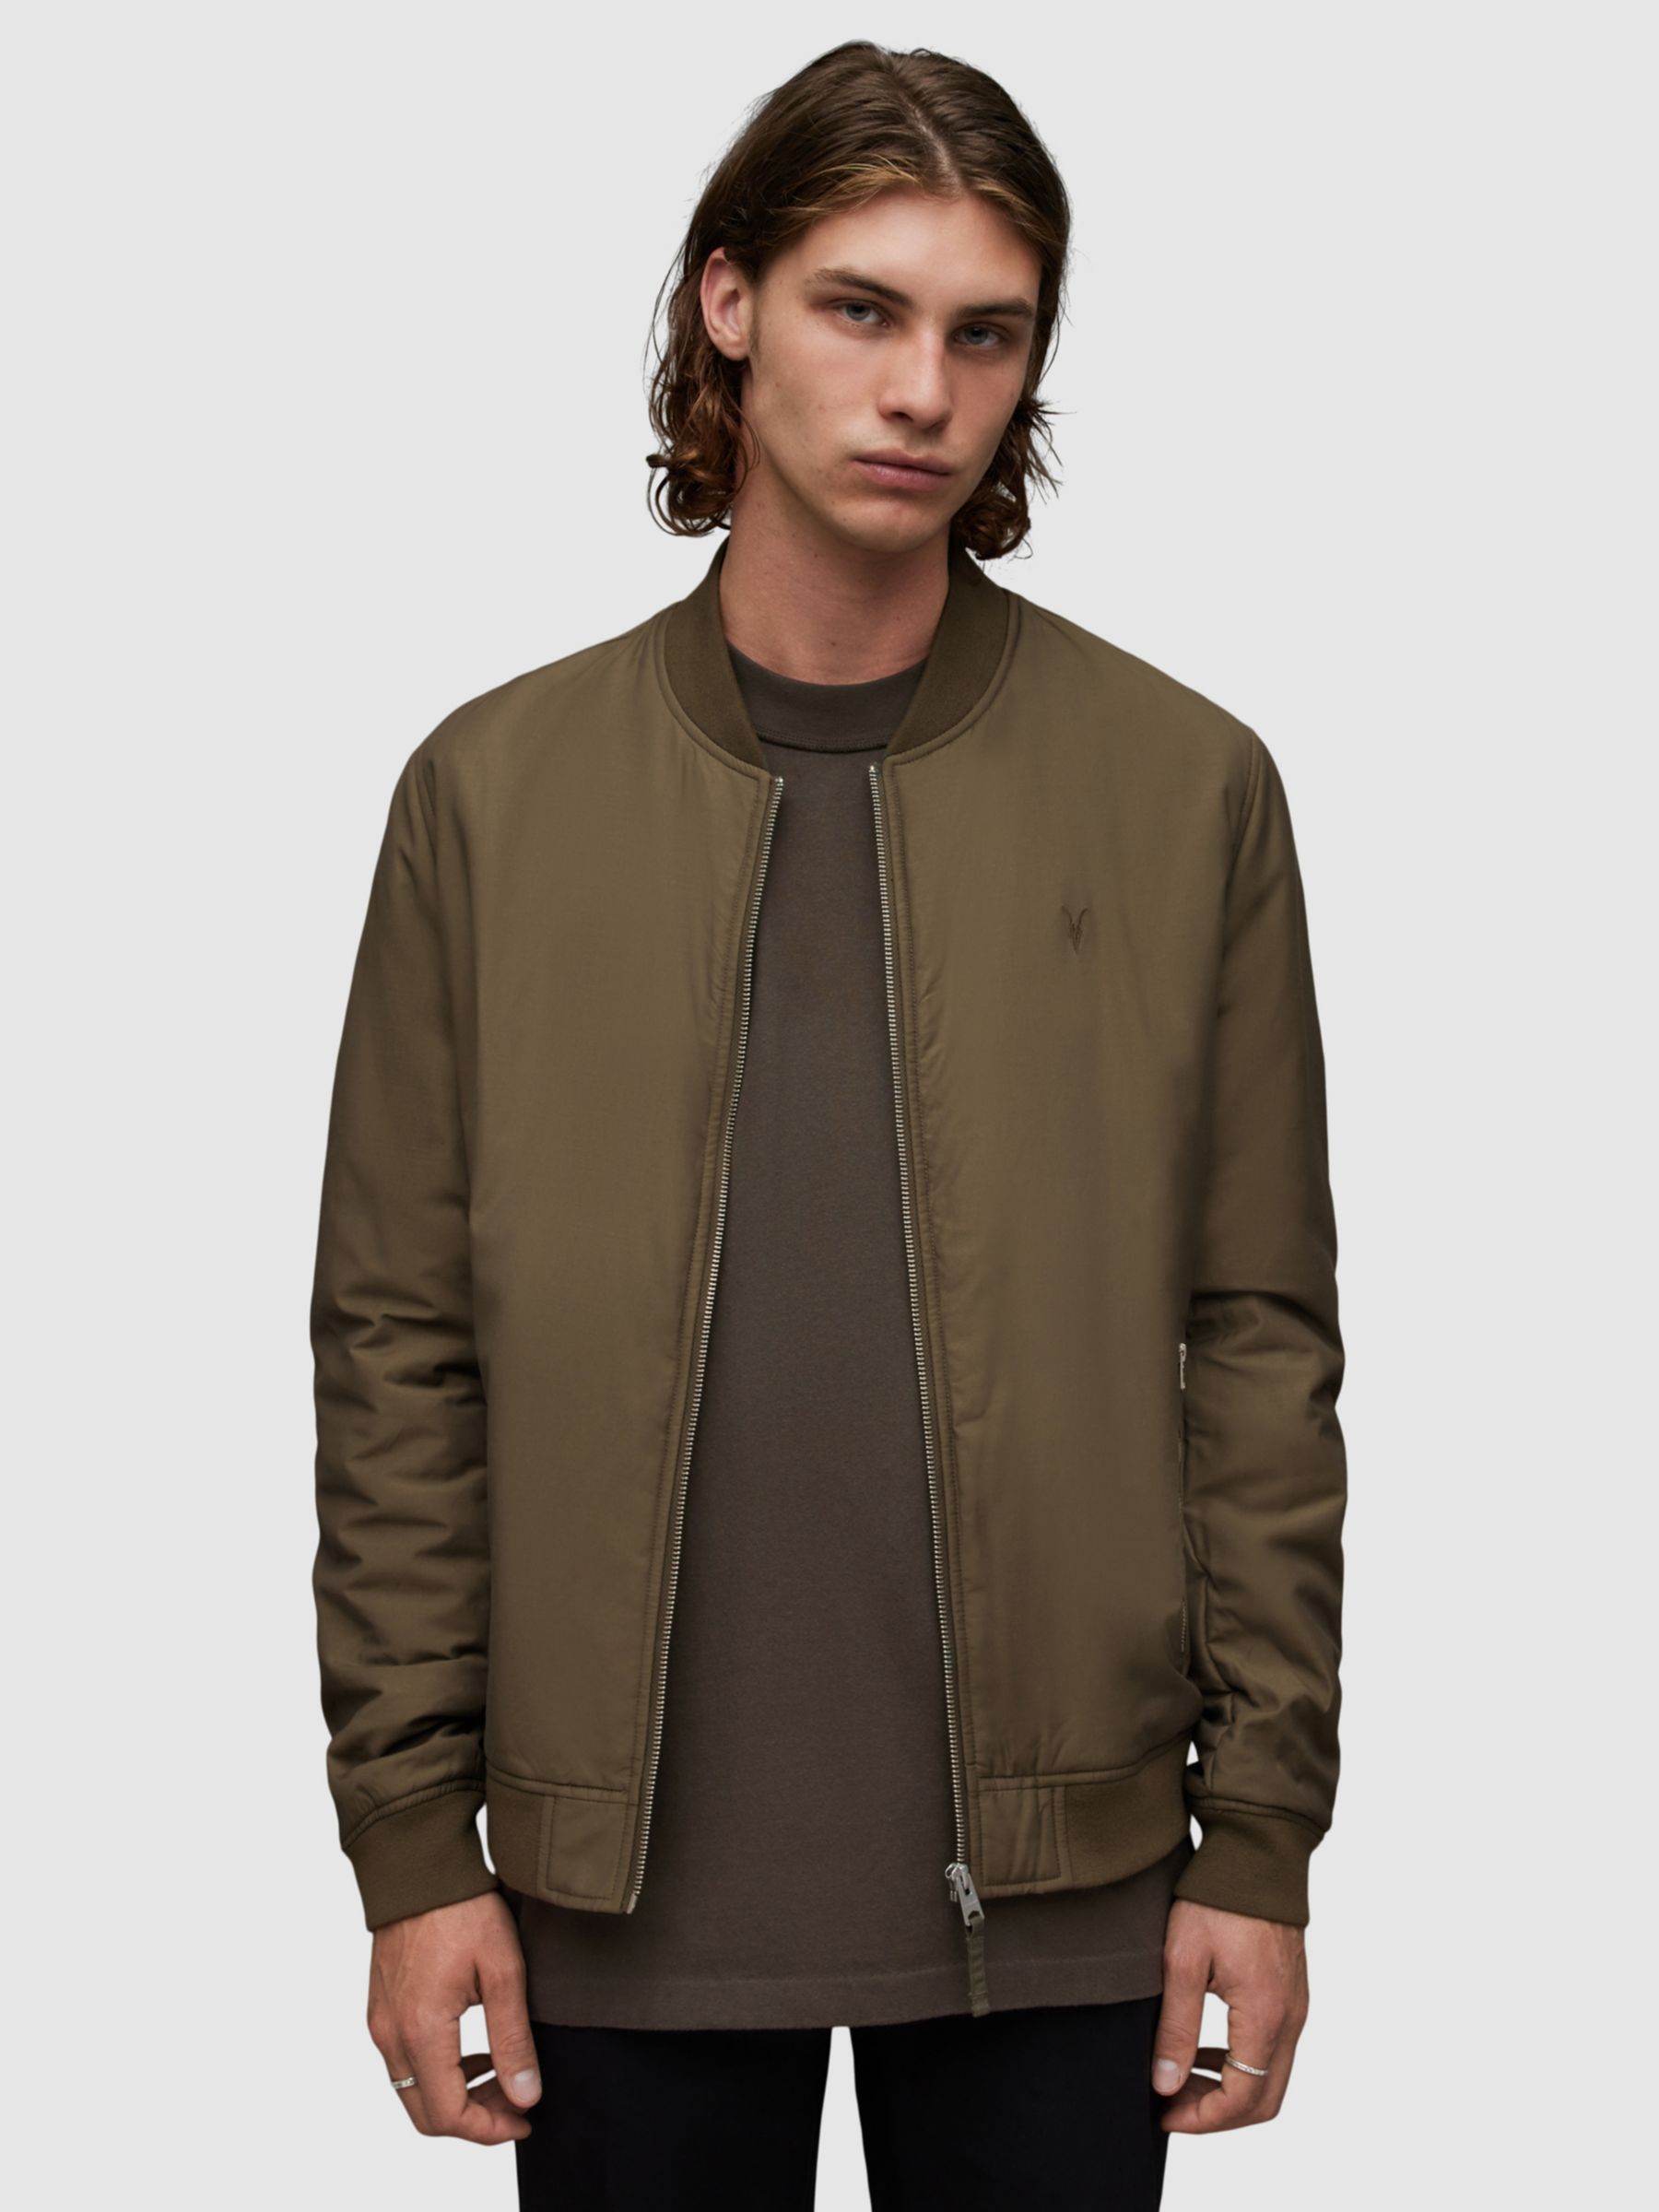 AllSaints Withrow Bomber Jacket, Green at John Lewis & Partners